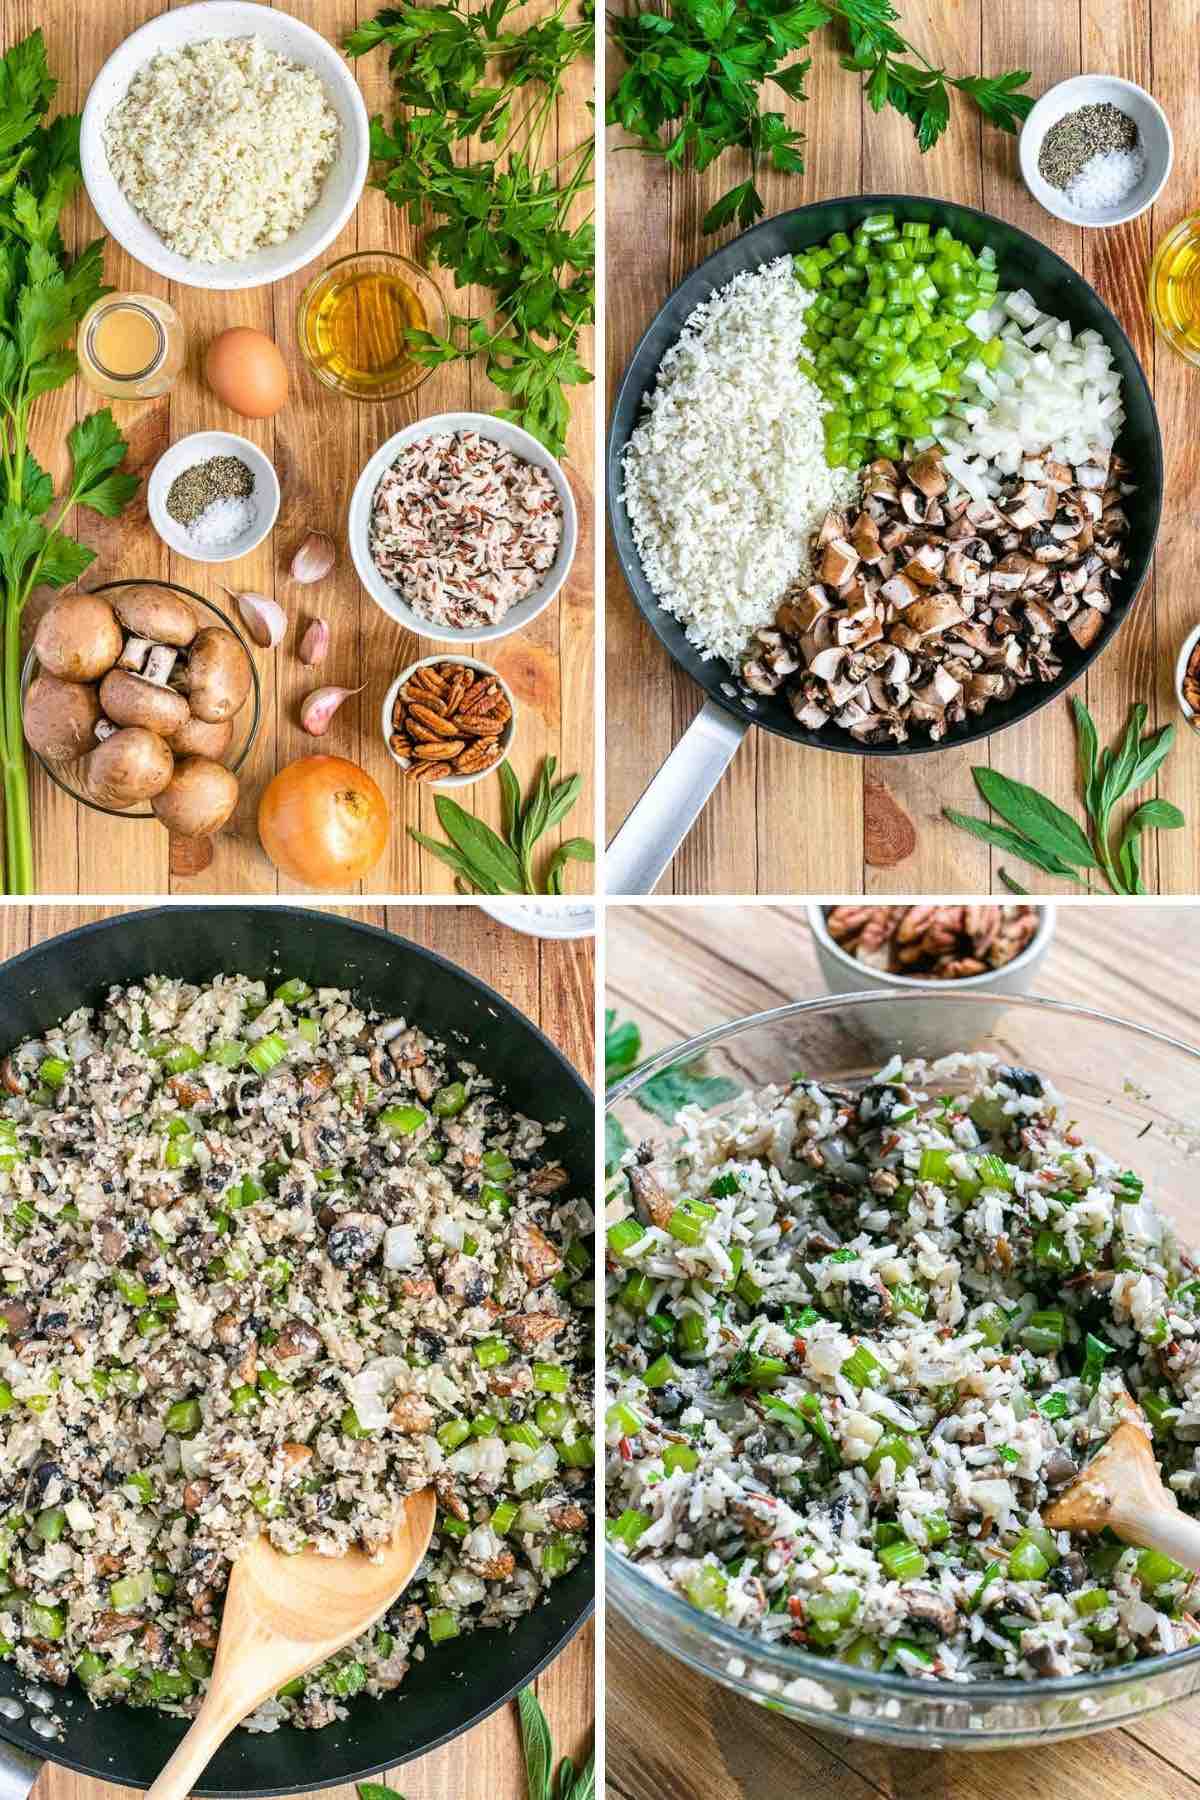 Healthy Wild Rice Stuffing collage